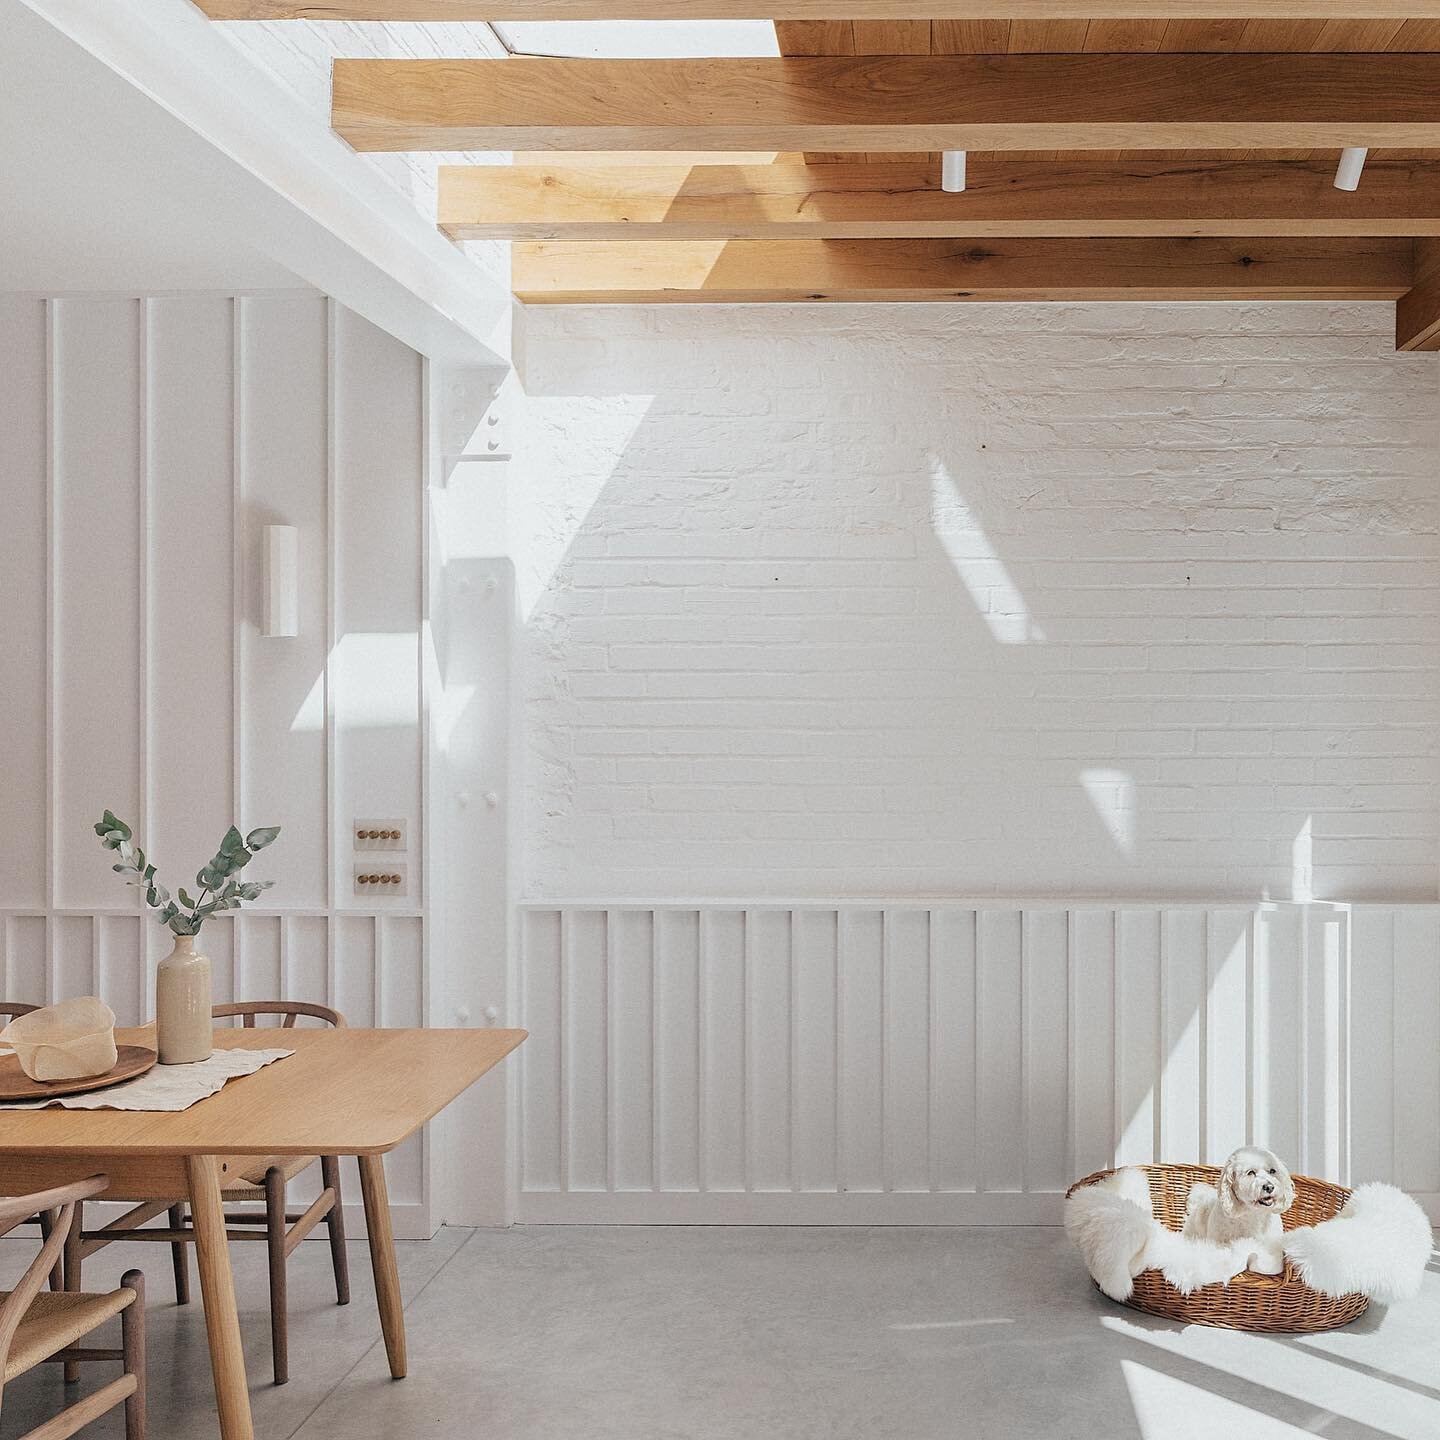 Introducing Huron House //

We&rsquo;re so pleased to be able to share photos of our latest completed project, Huron House, the renovation of a four-storey terraced family home in Notting Hill. 

The property, built in the late 1800s, faced structura